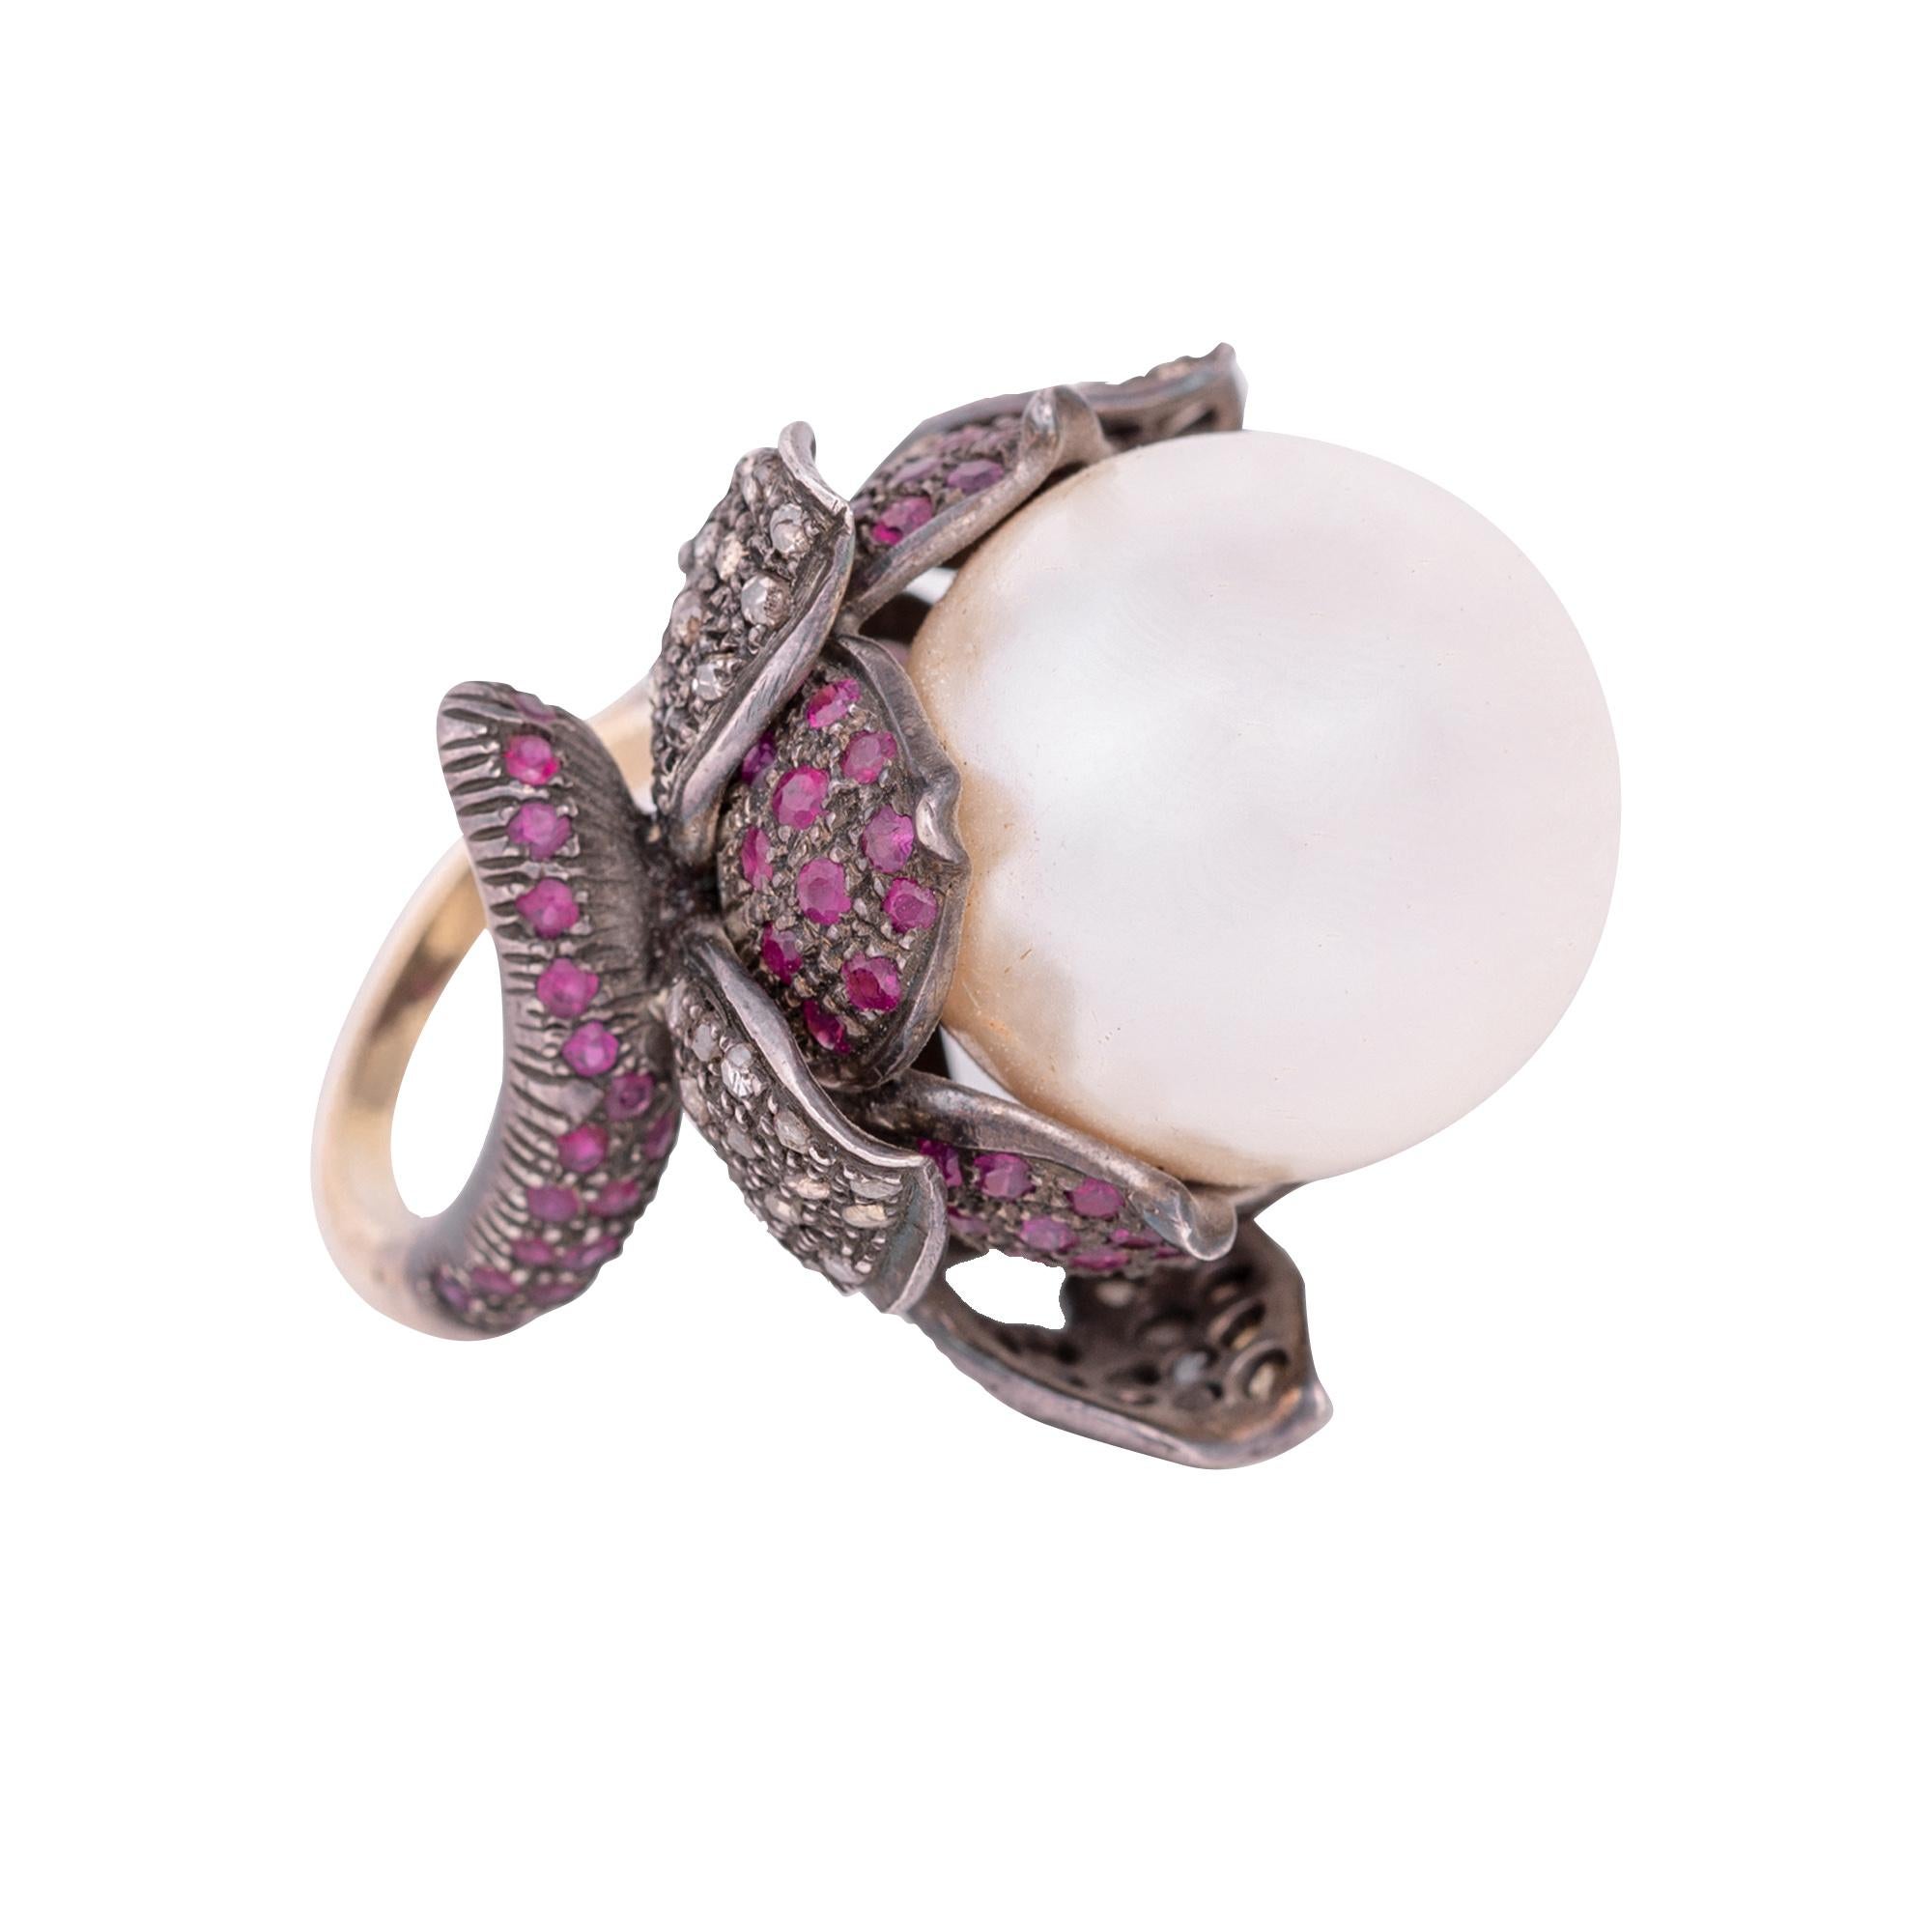 Diamond, Pearl, and Ruby Cocktail Flower Ring in Art-Deco Style

This Victorian era art-deco style floral pearl, pink-red ruby and diamond ring is harmonizing. The natural off-white perfect round south-sea pearl solitaire forming the flower’s pistil